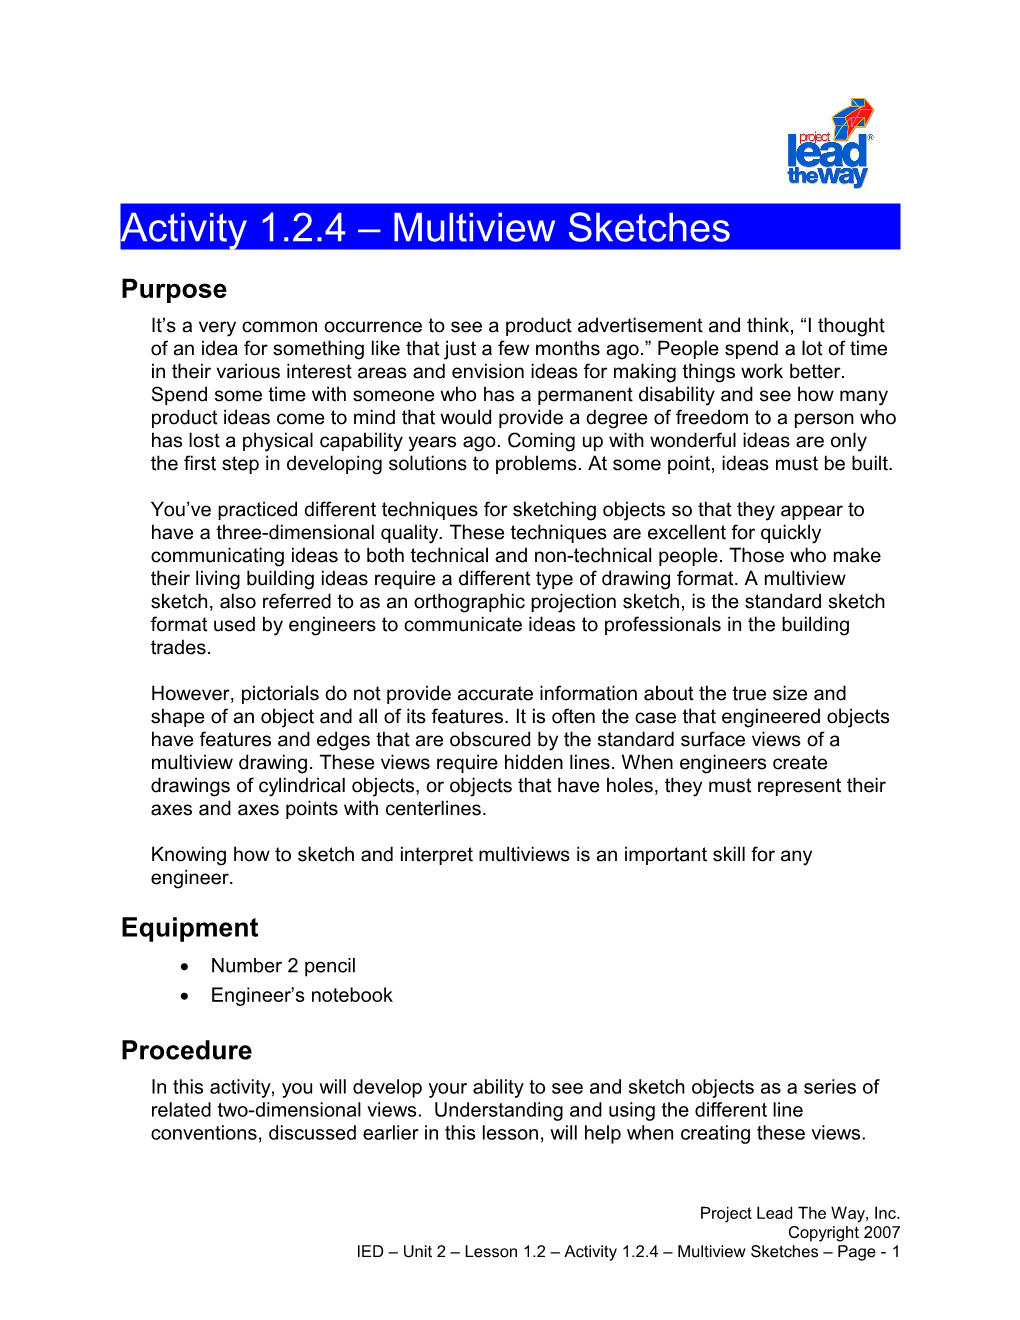 Activity 1.2.4:Multiview Sketches